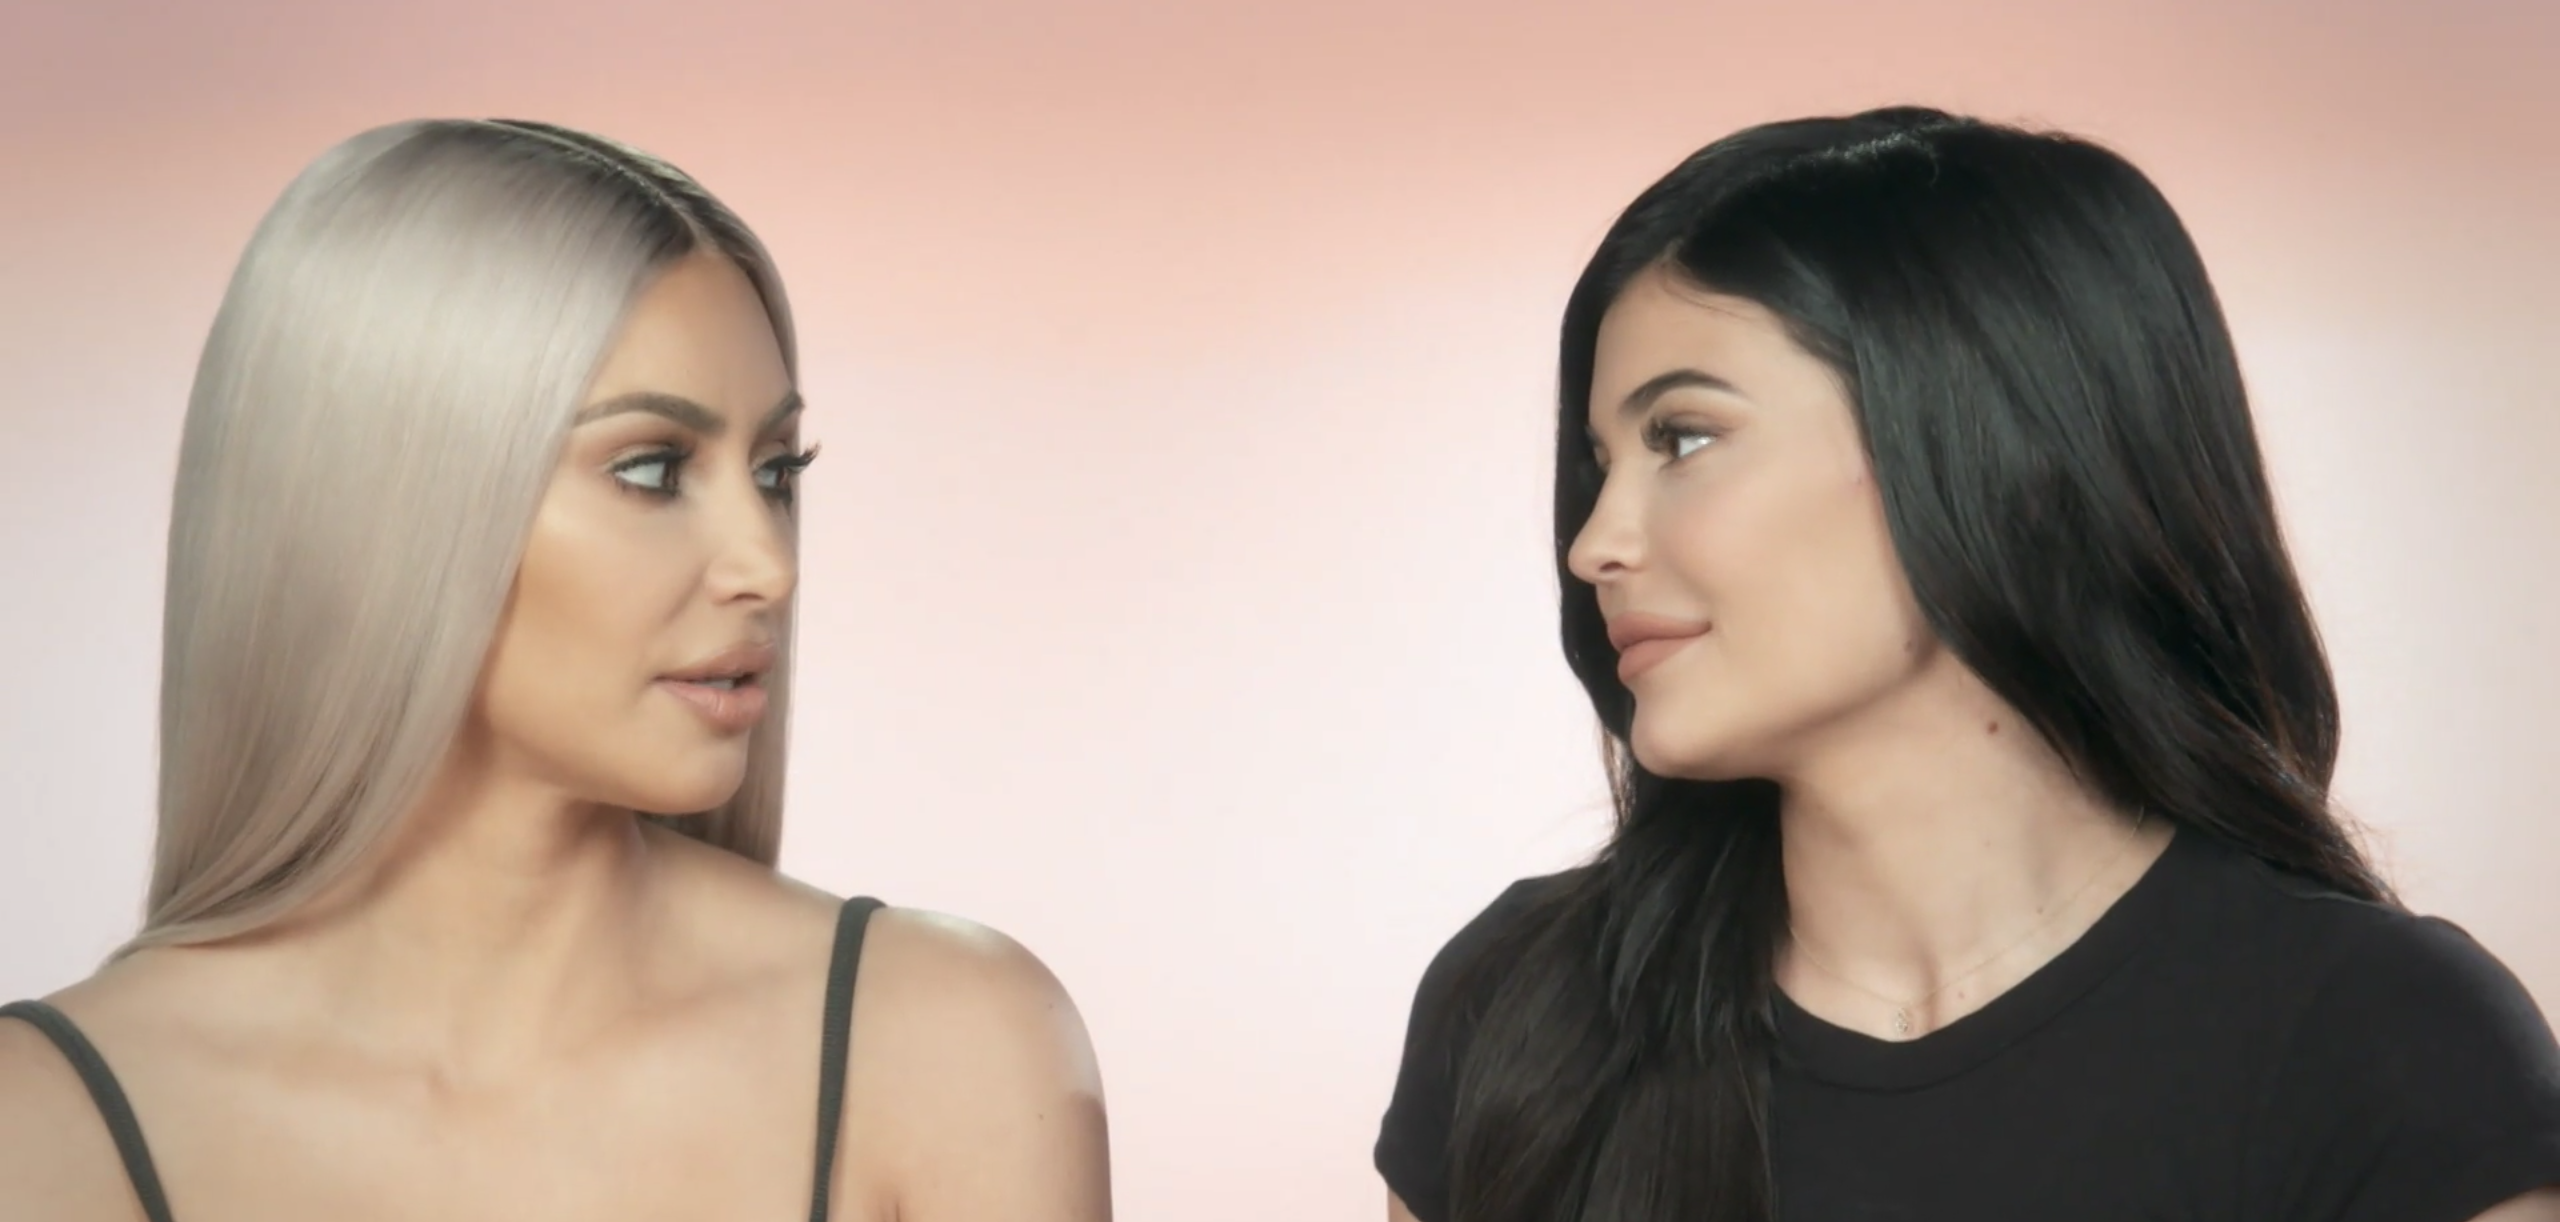 Has Kylie LEFT Keeping Up with the Kardashians? Will she be back?